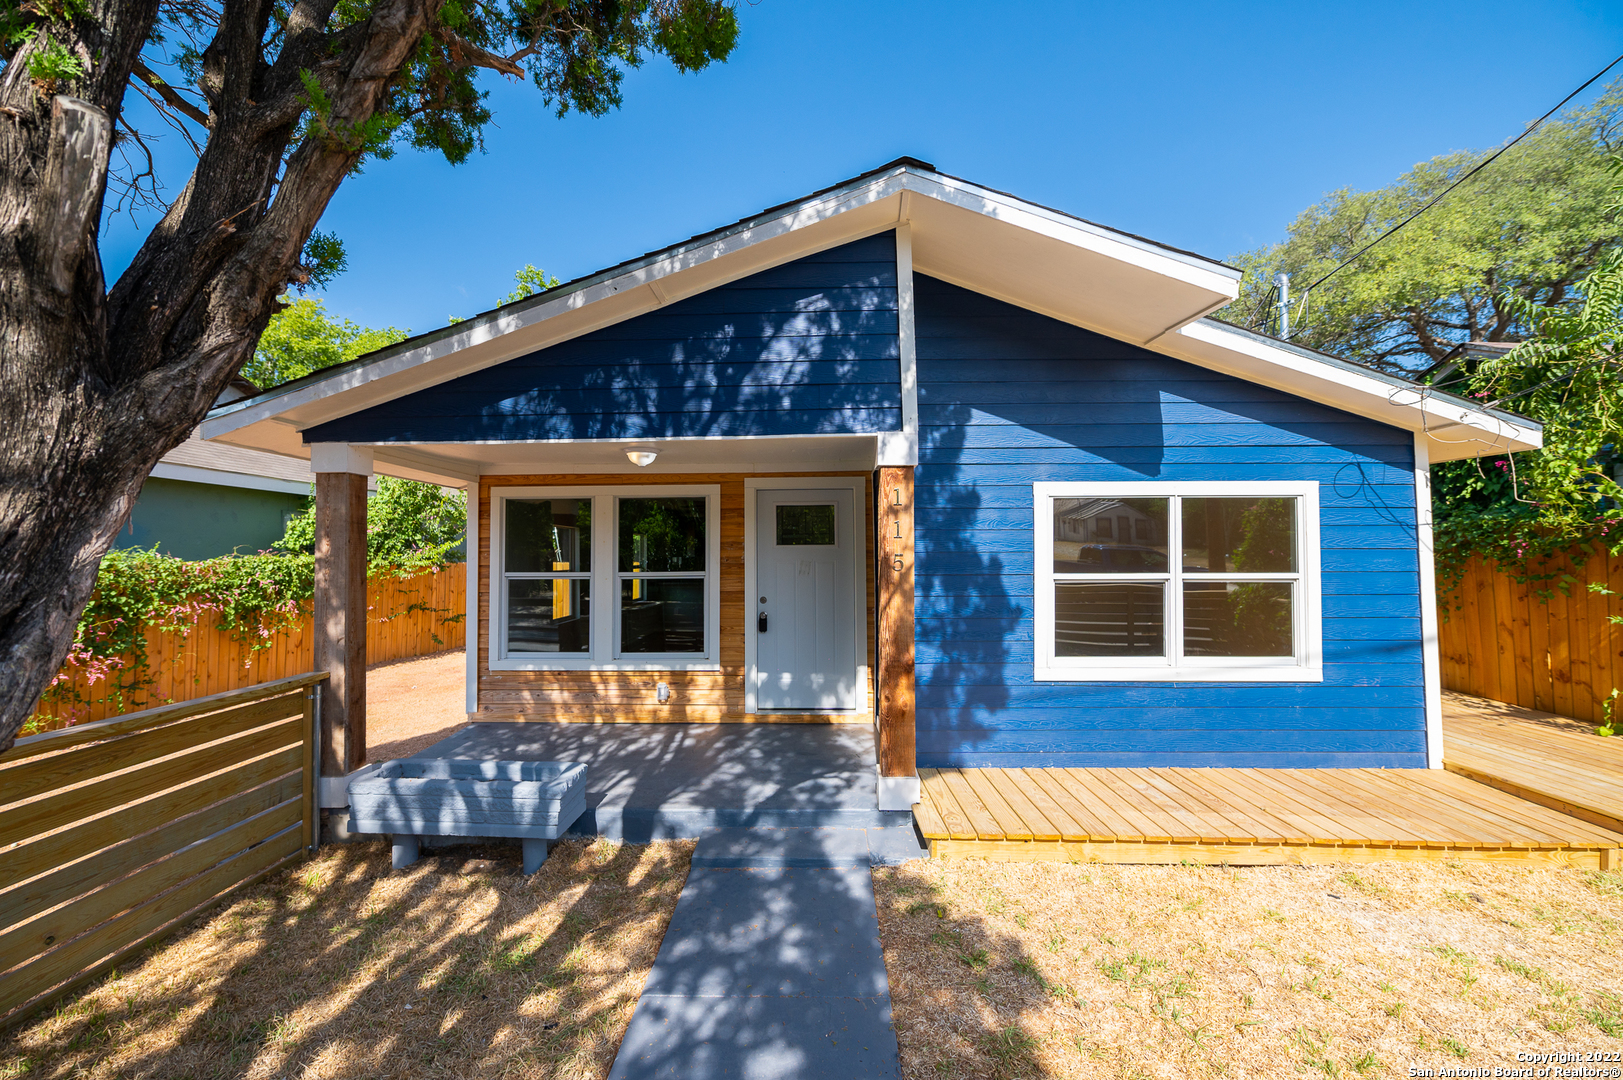 Beautifully Renovated Cottage Home in the heart of Denver Heights.  New Bamboo Hardwood Floors throughout and tile in the wet areas.  4 Bedrooms and a flex room make this home the perfect home in the city.  Everything in the home has been renovated.